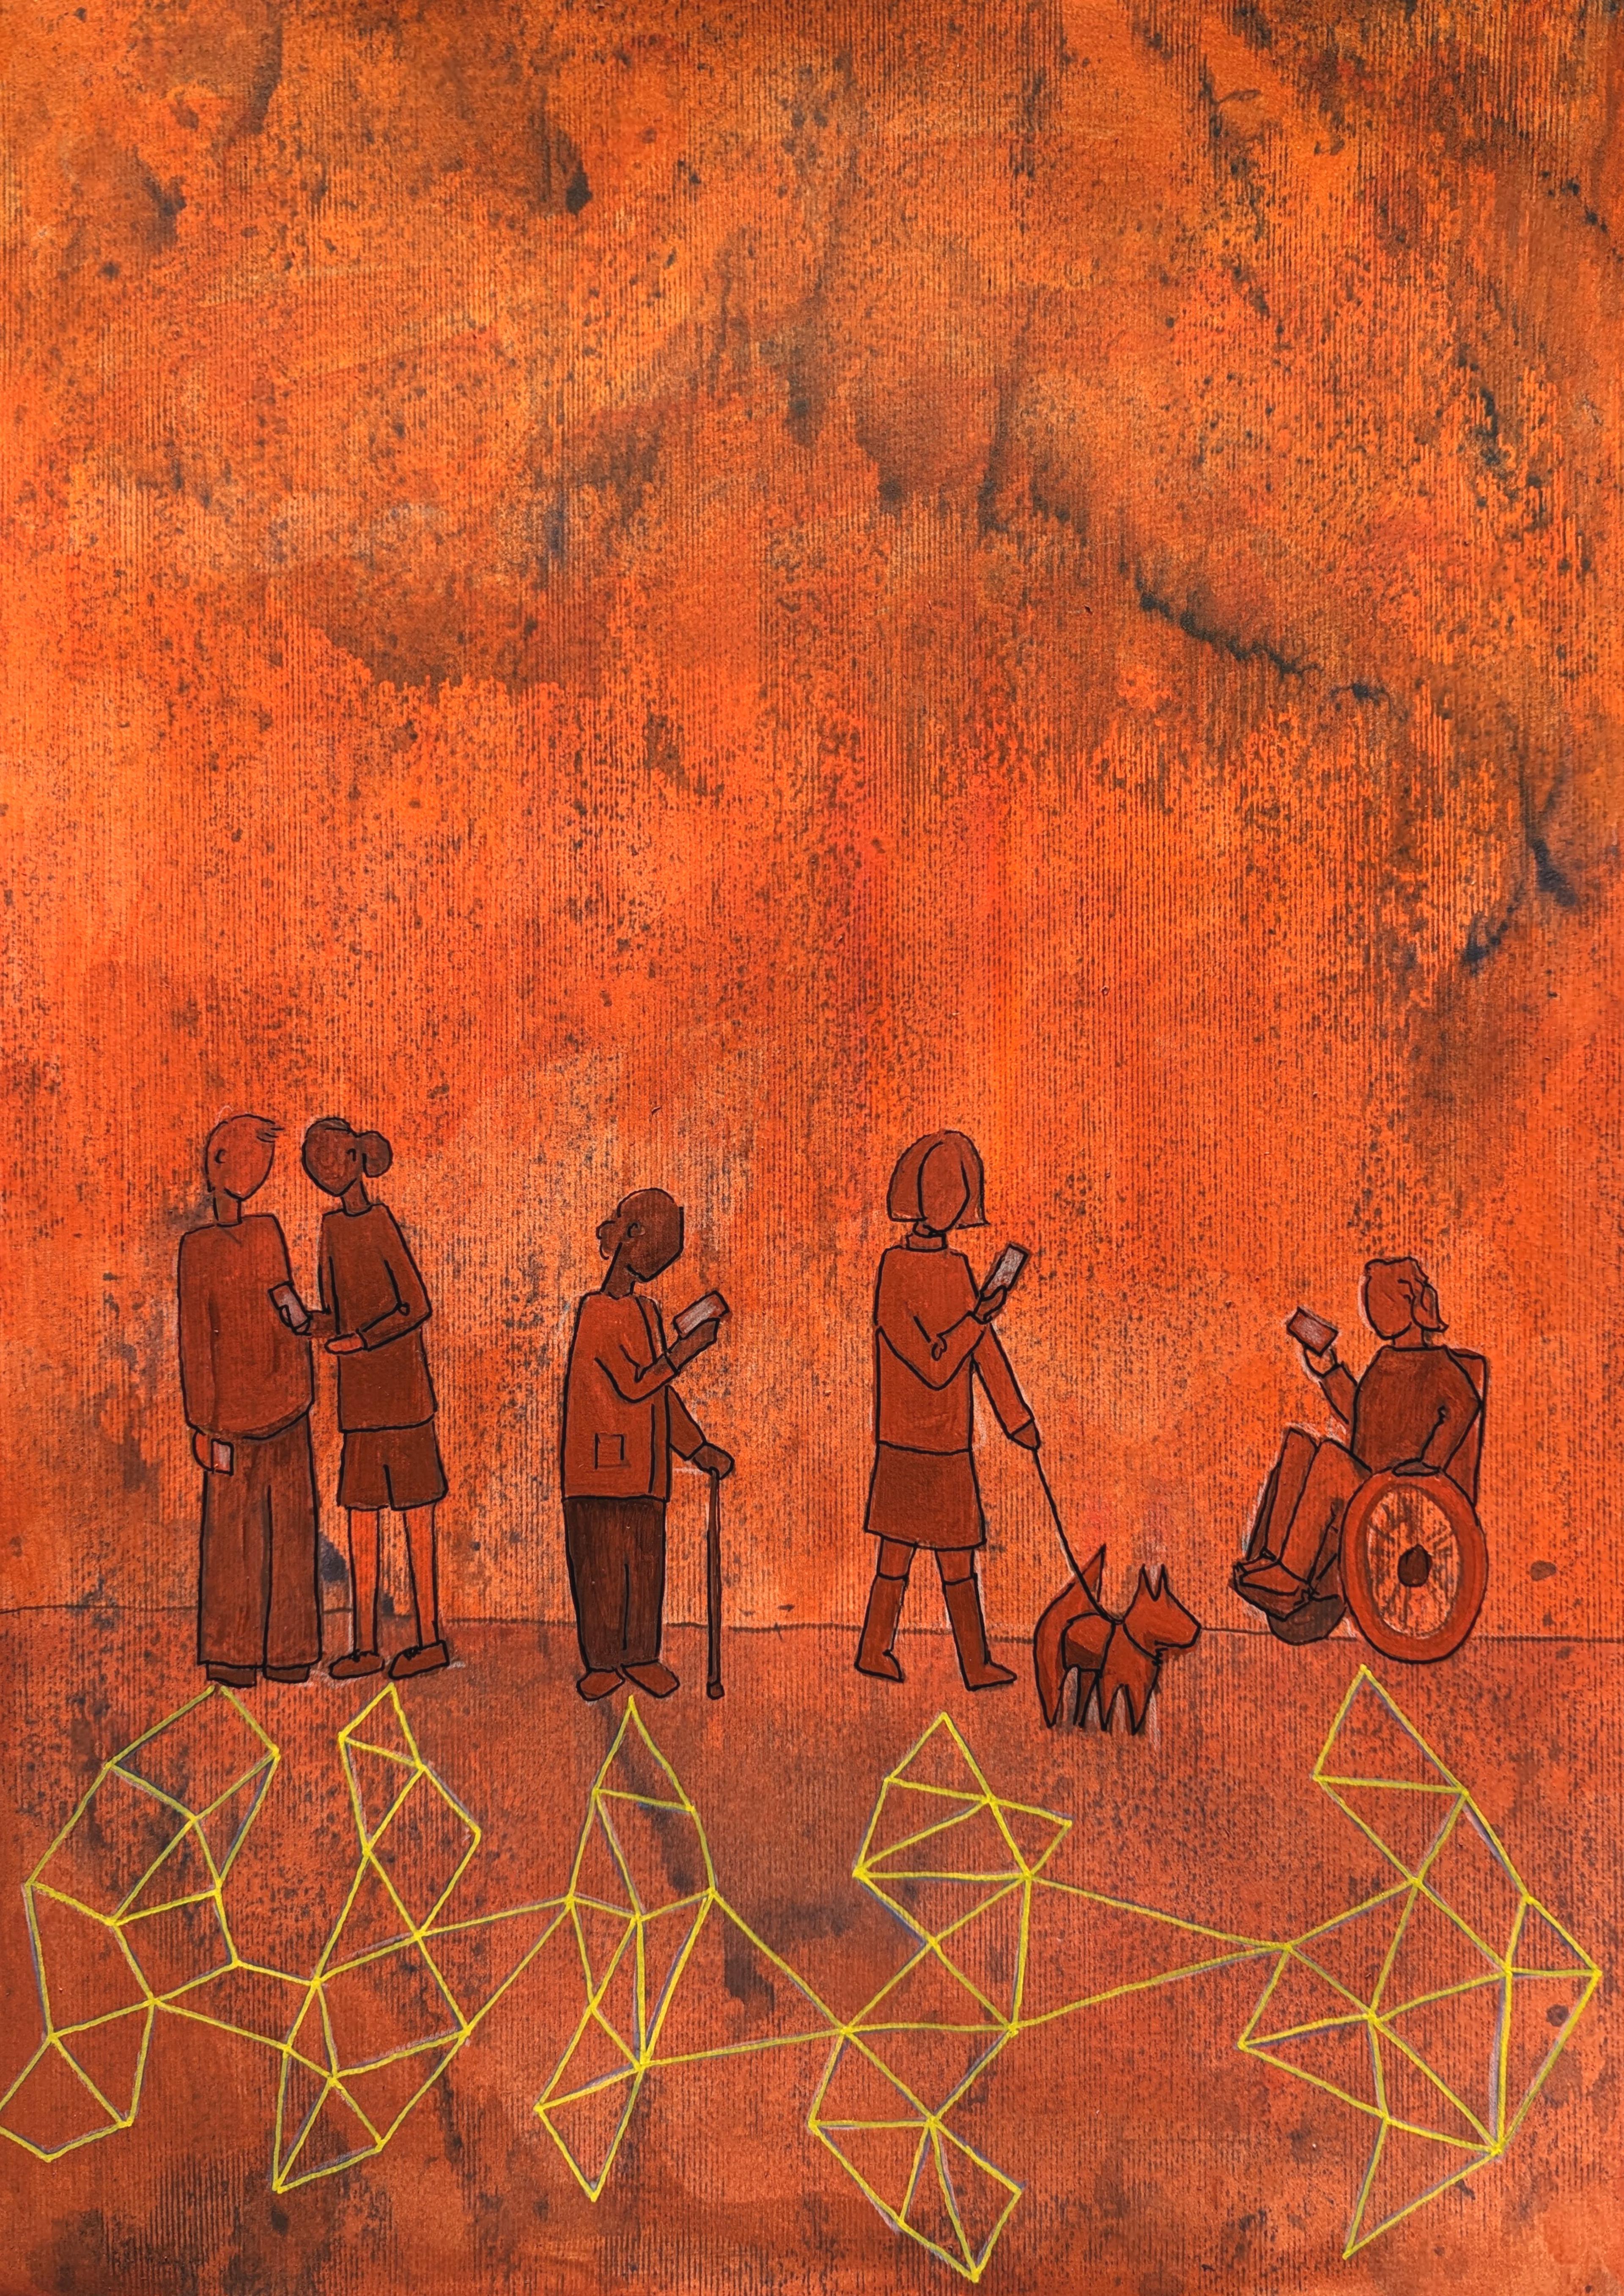 Five people and a dog are seen outlined in orange, against an orange background. Two of the people talk to each other, one stands along with a stick, one walks a dog, and the other is in a wheelchair. All of them look at their mobile phones intently, and all cast shadows on the ground. The shadows are made up of network diagrams, being representative, rather than literal shadows.